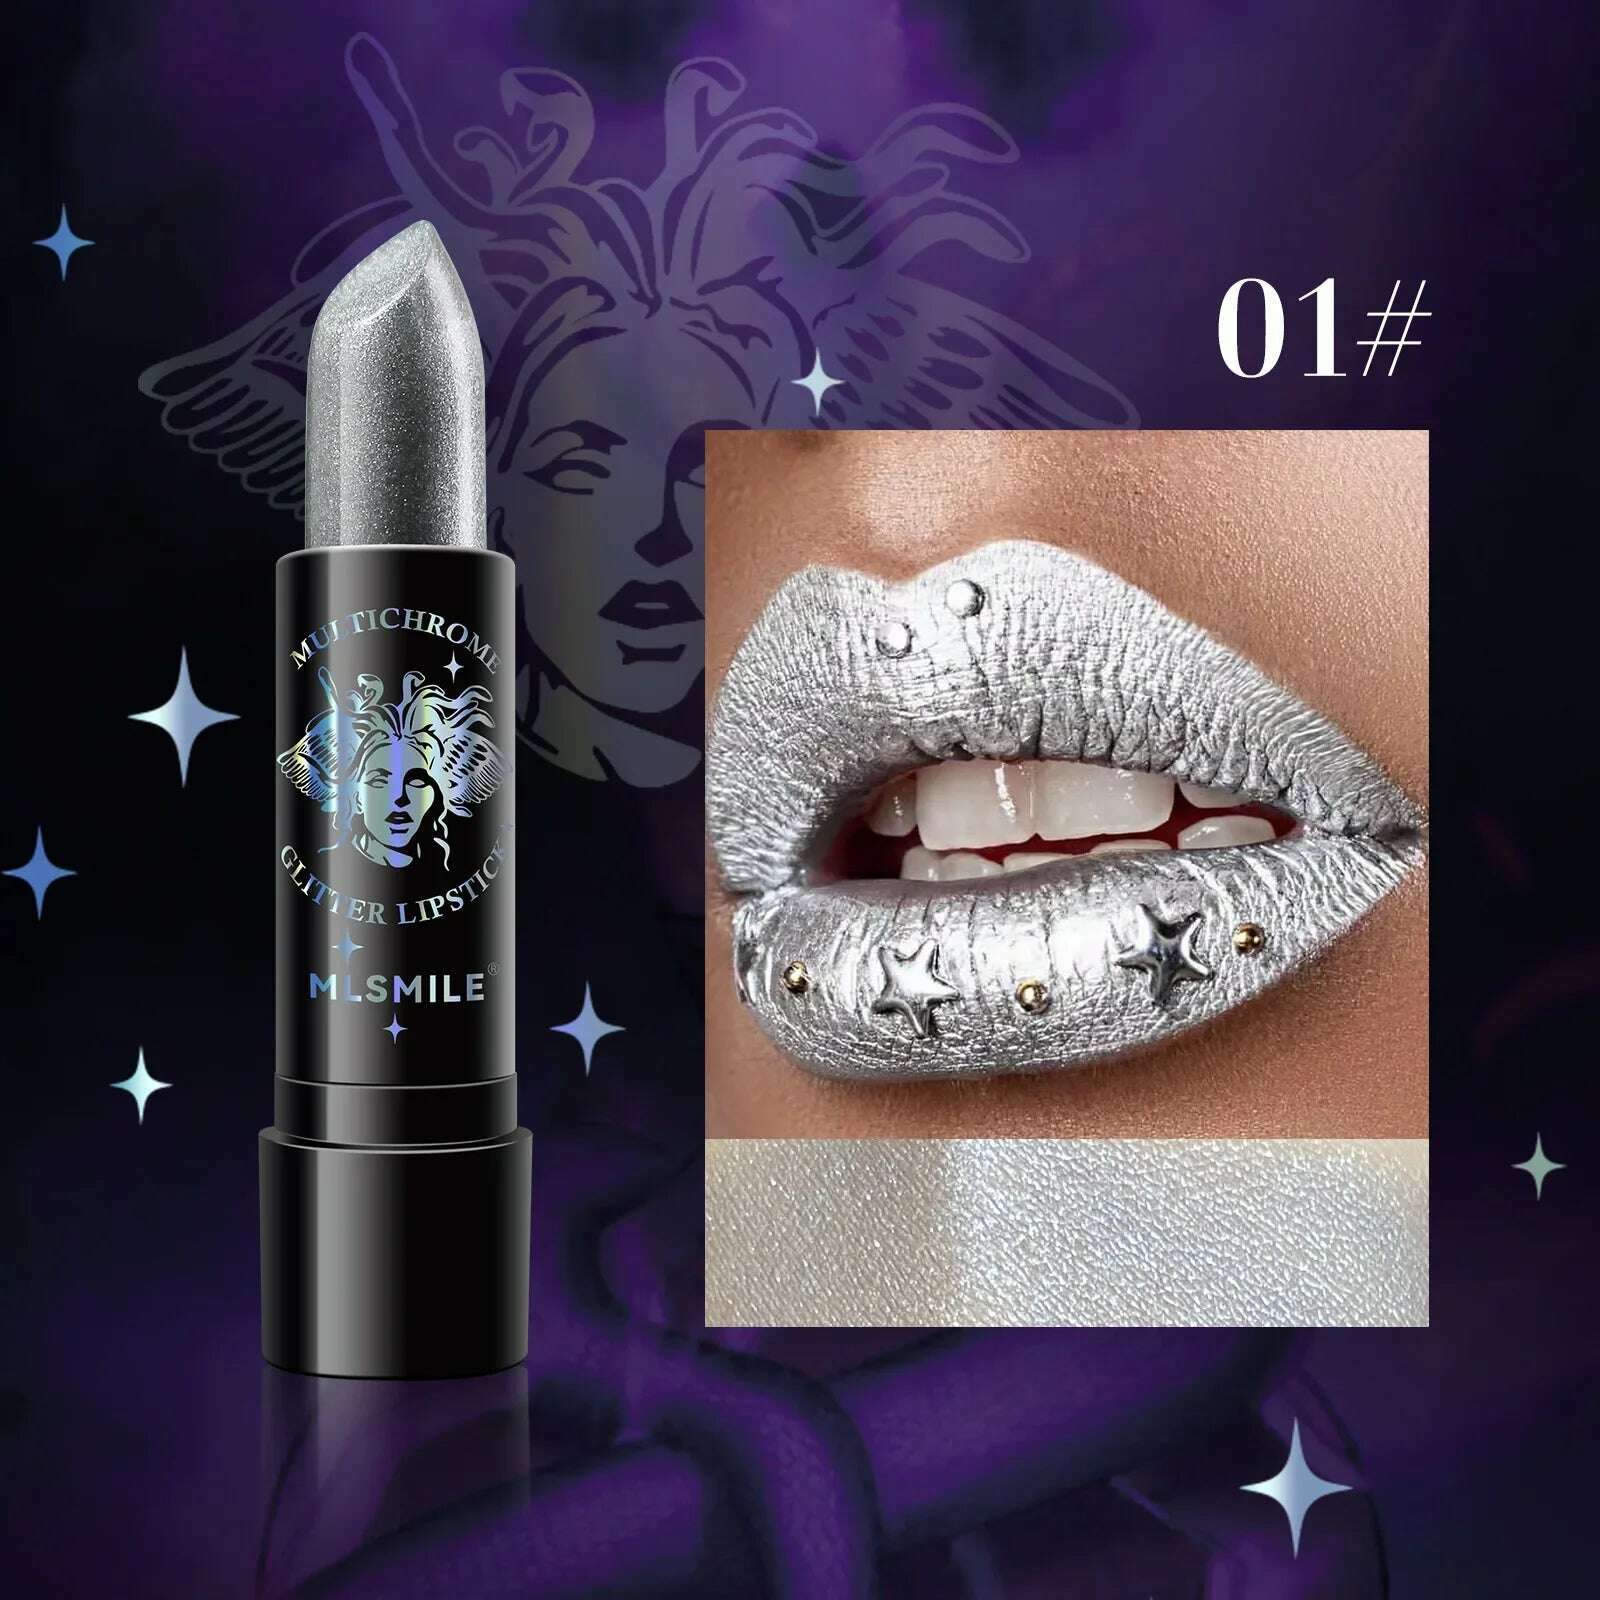 KIMLUD, Waterproof Glitter Matte Lipstick Long Lasting Color Rendering Non-stick Cup Velvet Shiny Lipsticks Silver Gold Sexy Lips Makeup, A01, KIMLUD Women's Clothes